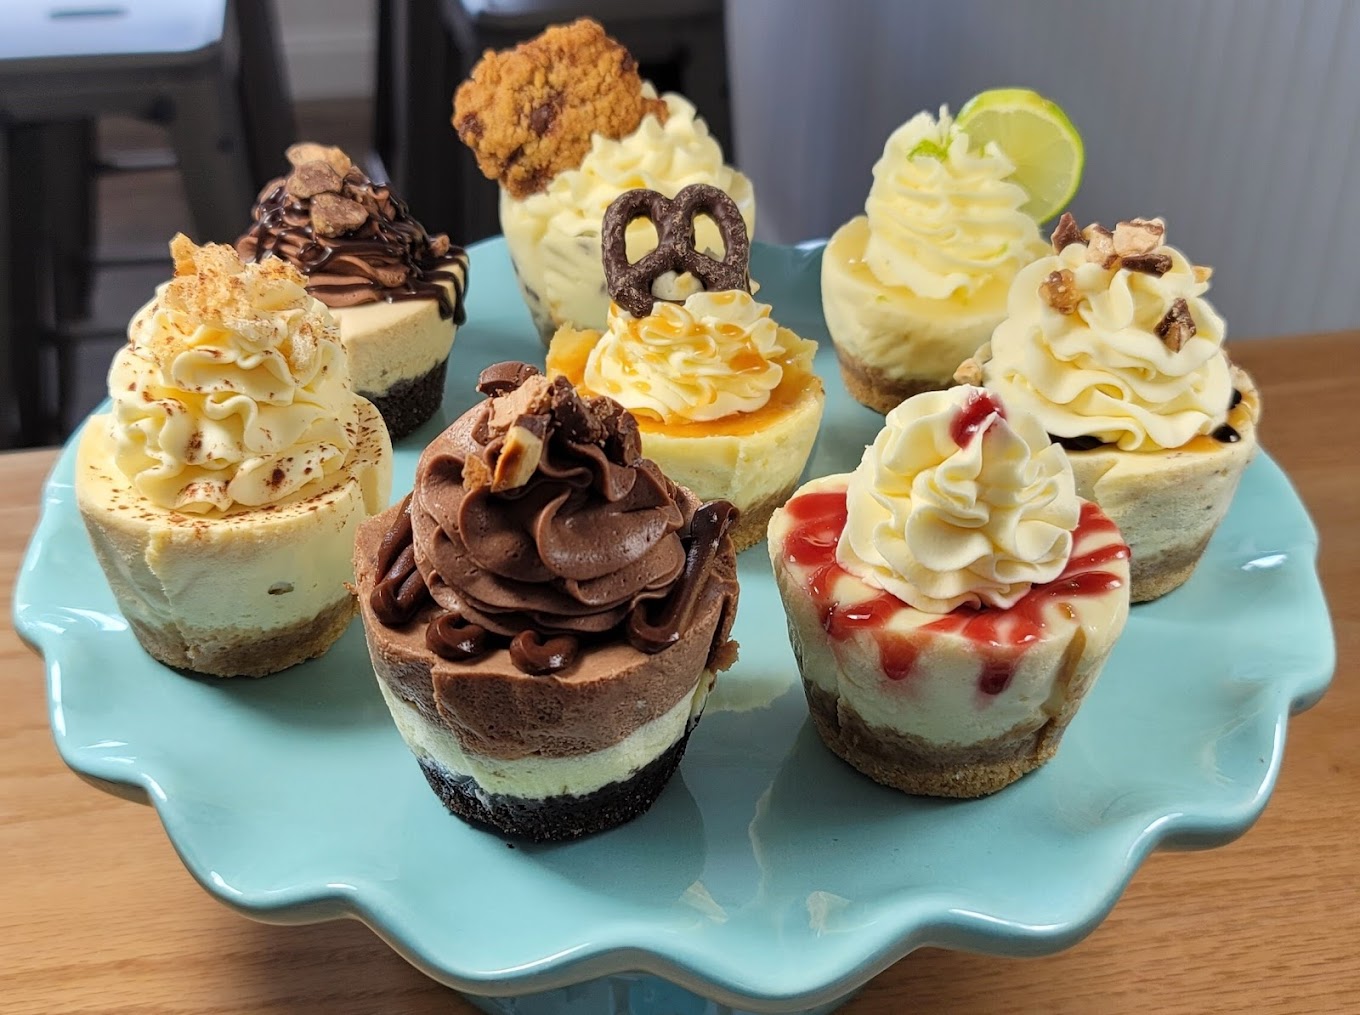 colorful cupcakes and pastries from The Cheesecake Cutie Cafe